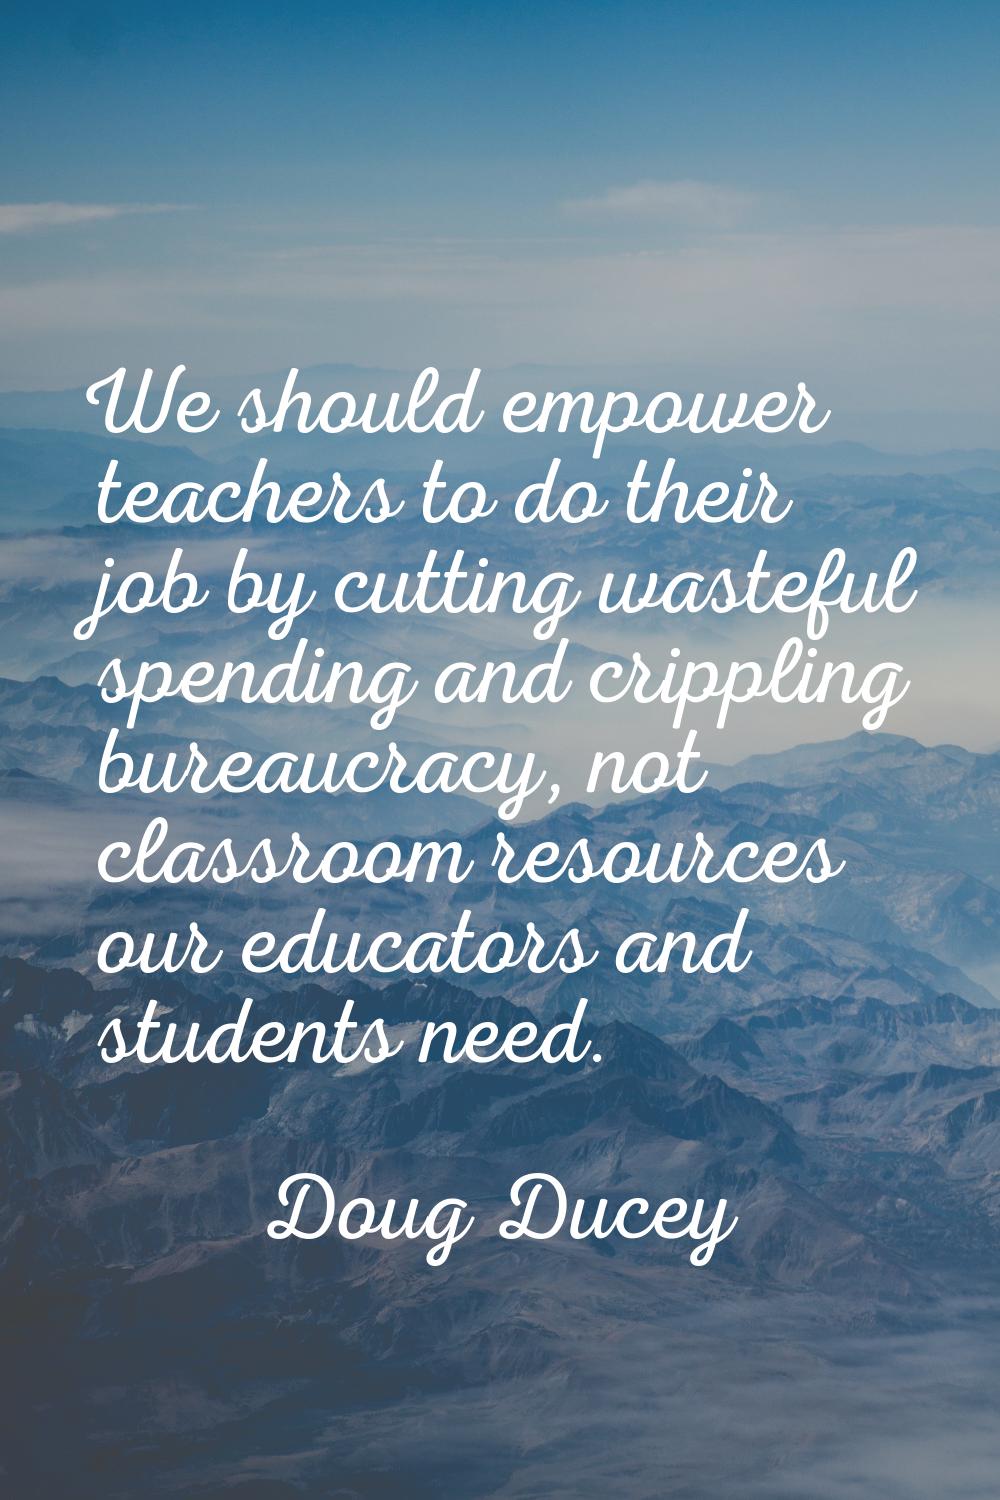 We should empower teachers to do their job by cutting wasteful spending and crippling bureaucracy, 